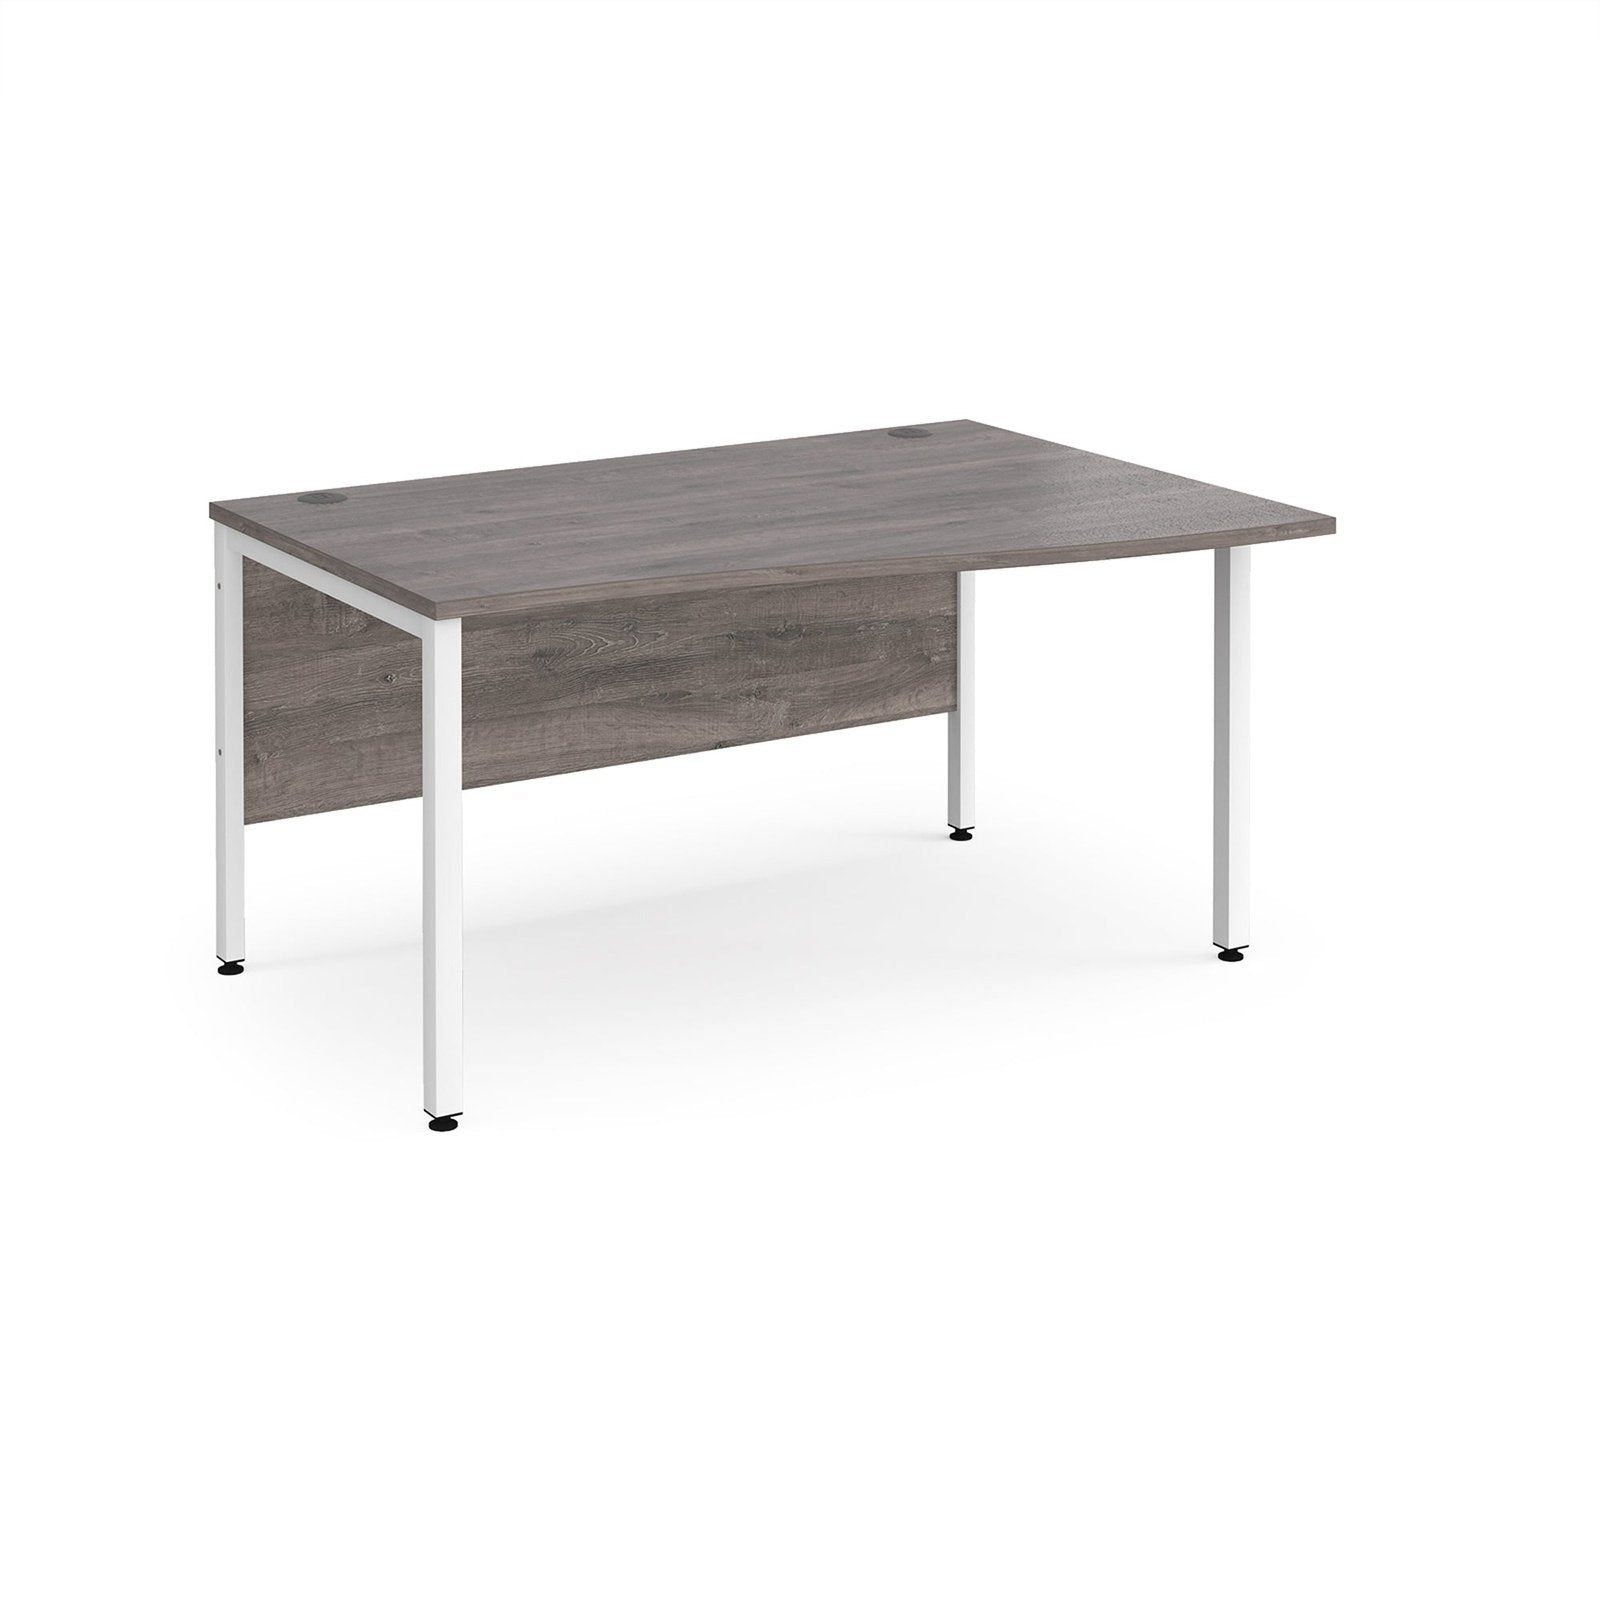 Maestro 25 bench leg right hand wave desk - Office Products Online